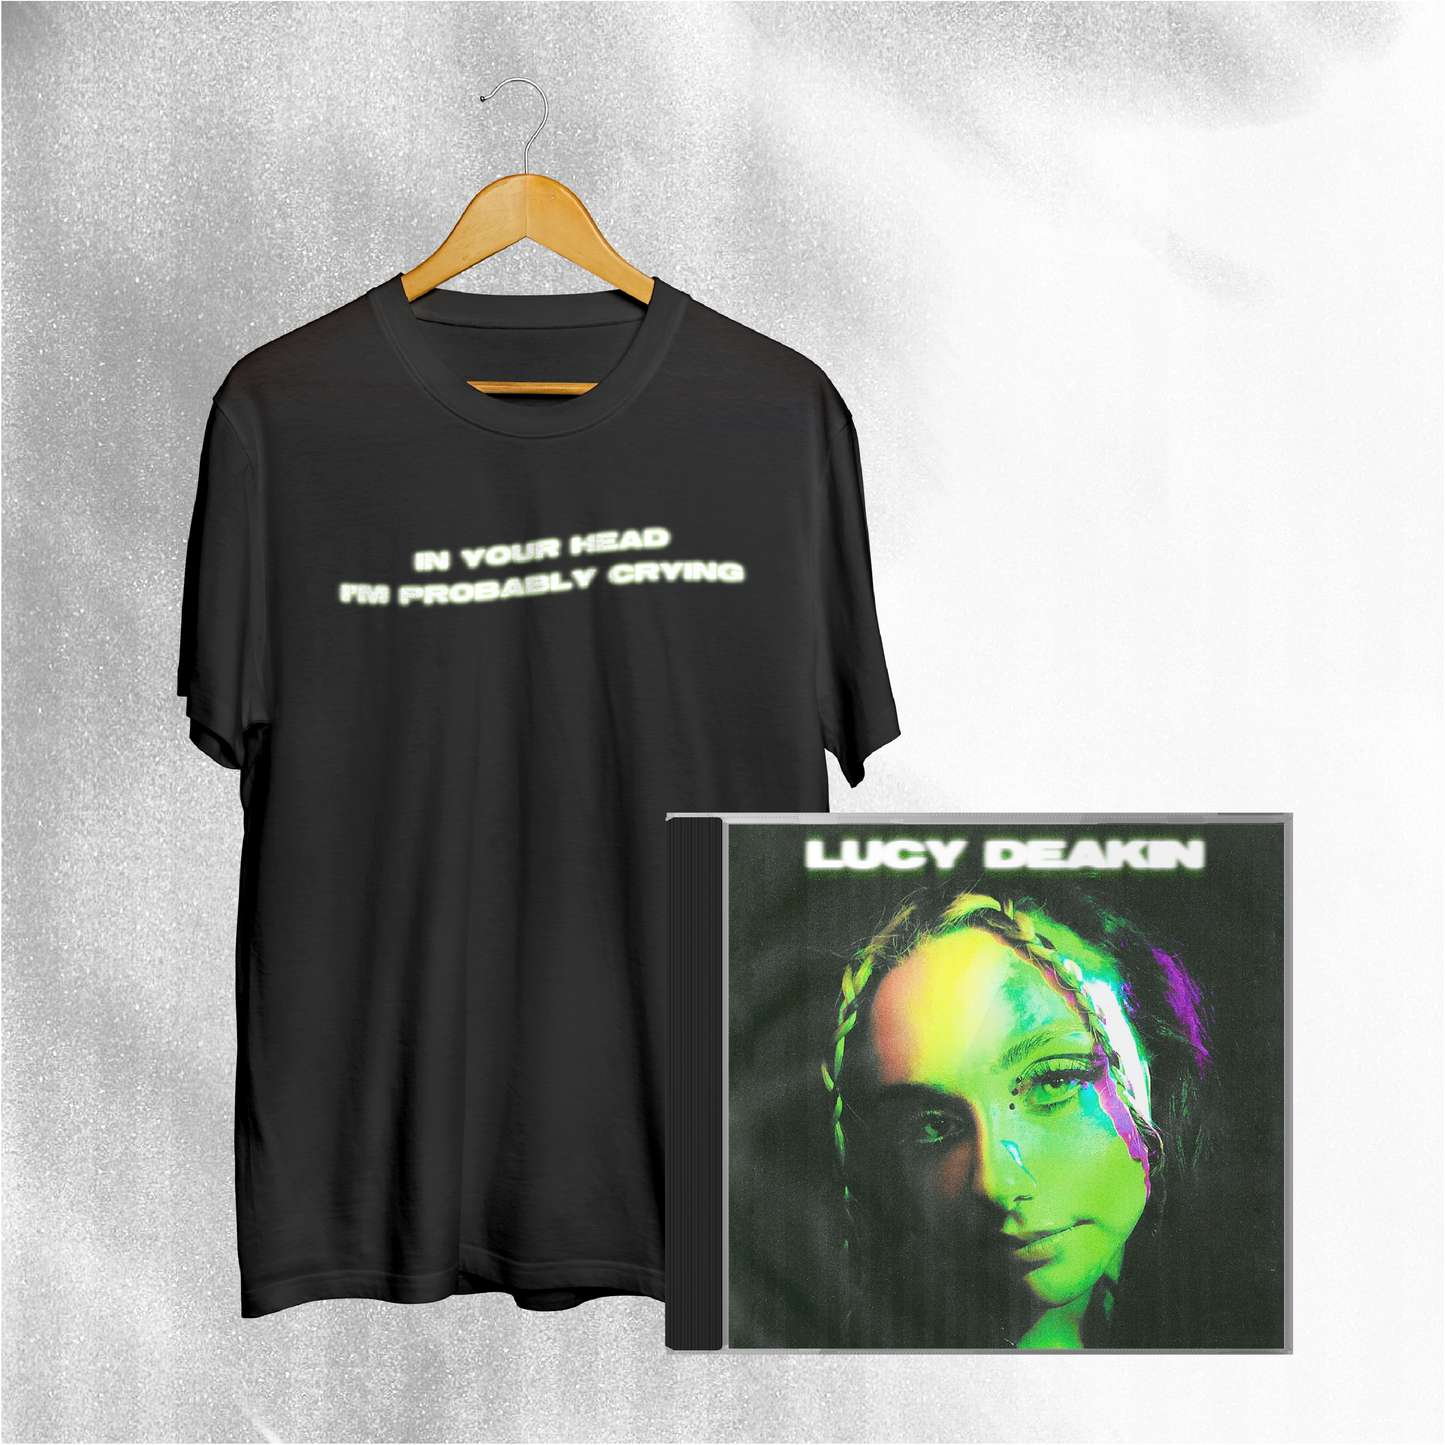 Lucy Deakin - 'in your head i'm probably crying' EP - Bundle - CD + T-Shirt